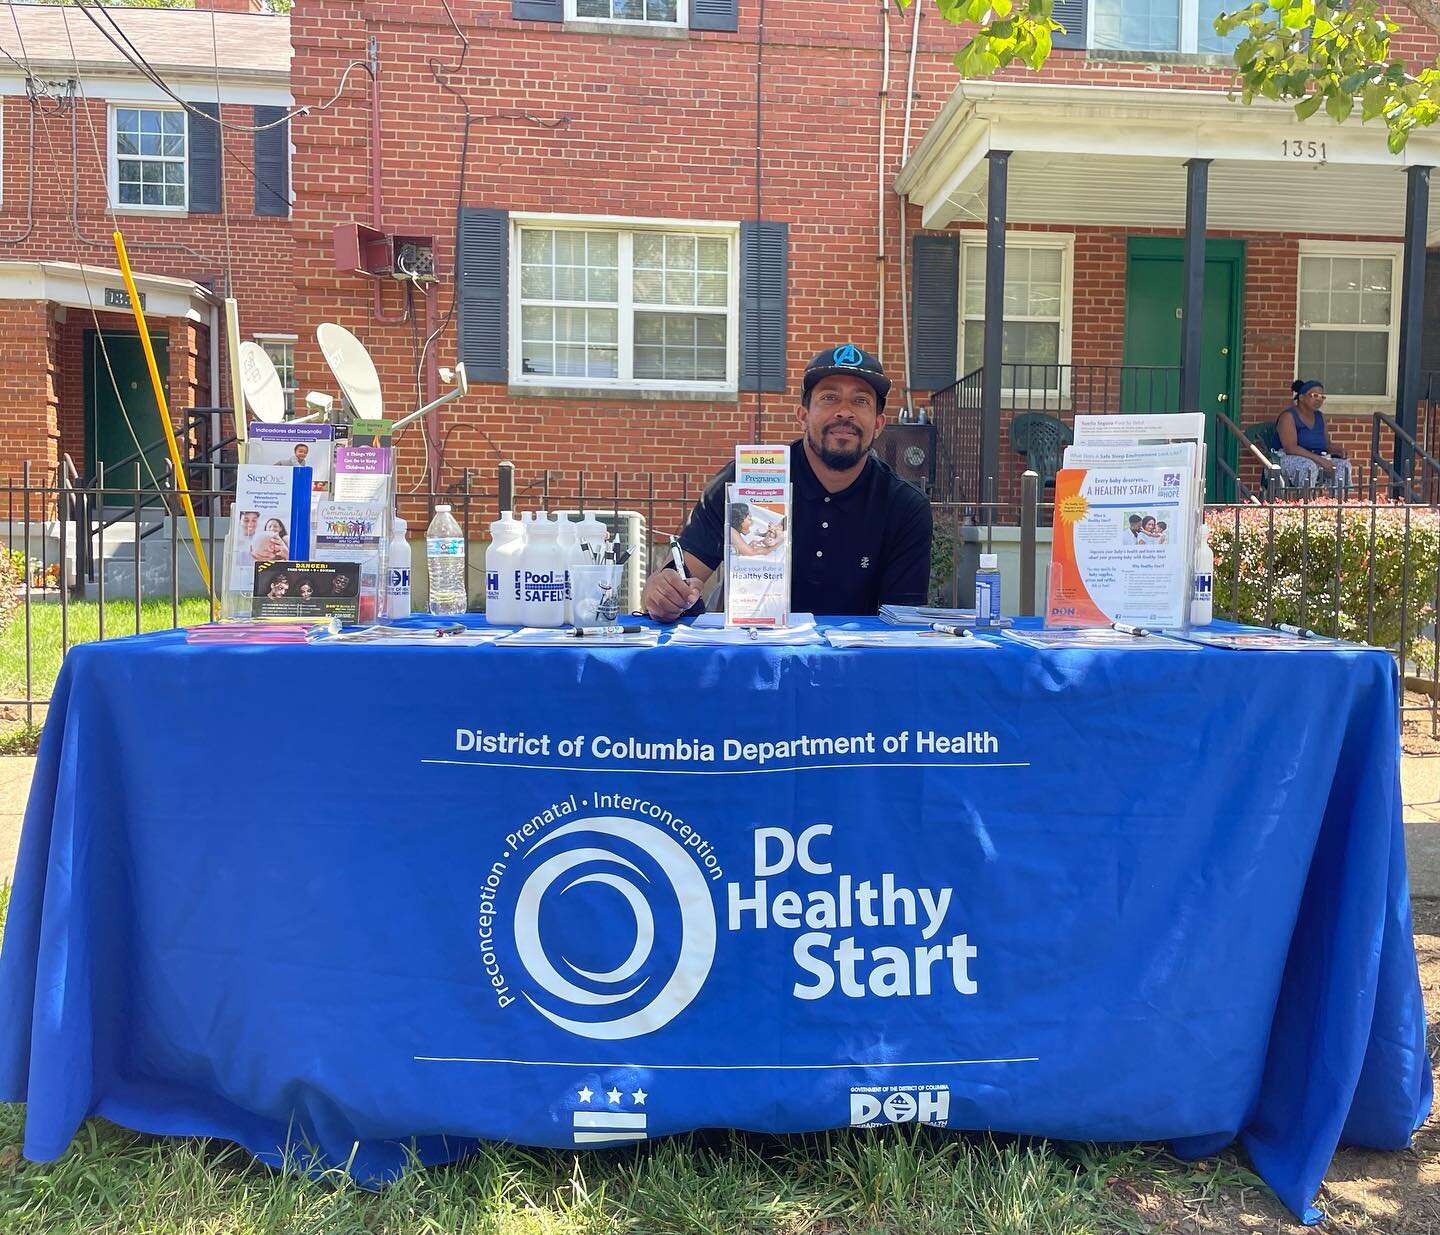 We outside in Congress Heights SE #DC once again for the last #Beatthestreetsdc festival for the #2022 season 🔥 come in through and get great information and give-always from #community  partners 🙌🏾 reppin  #dchealthystart